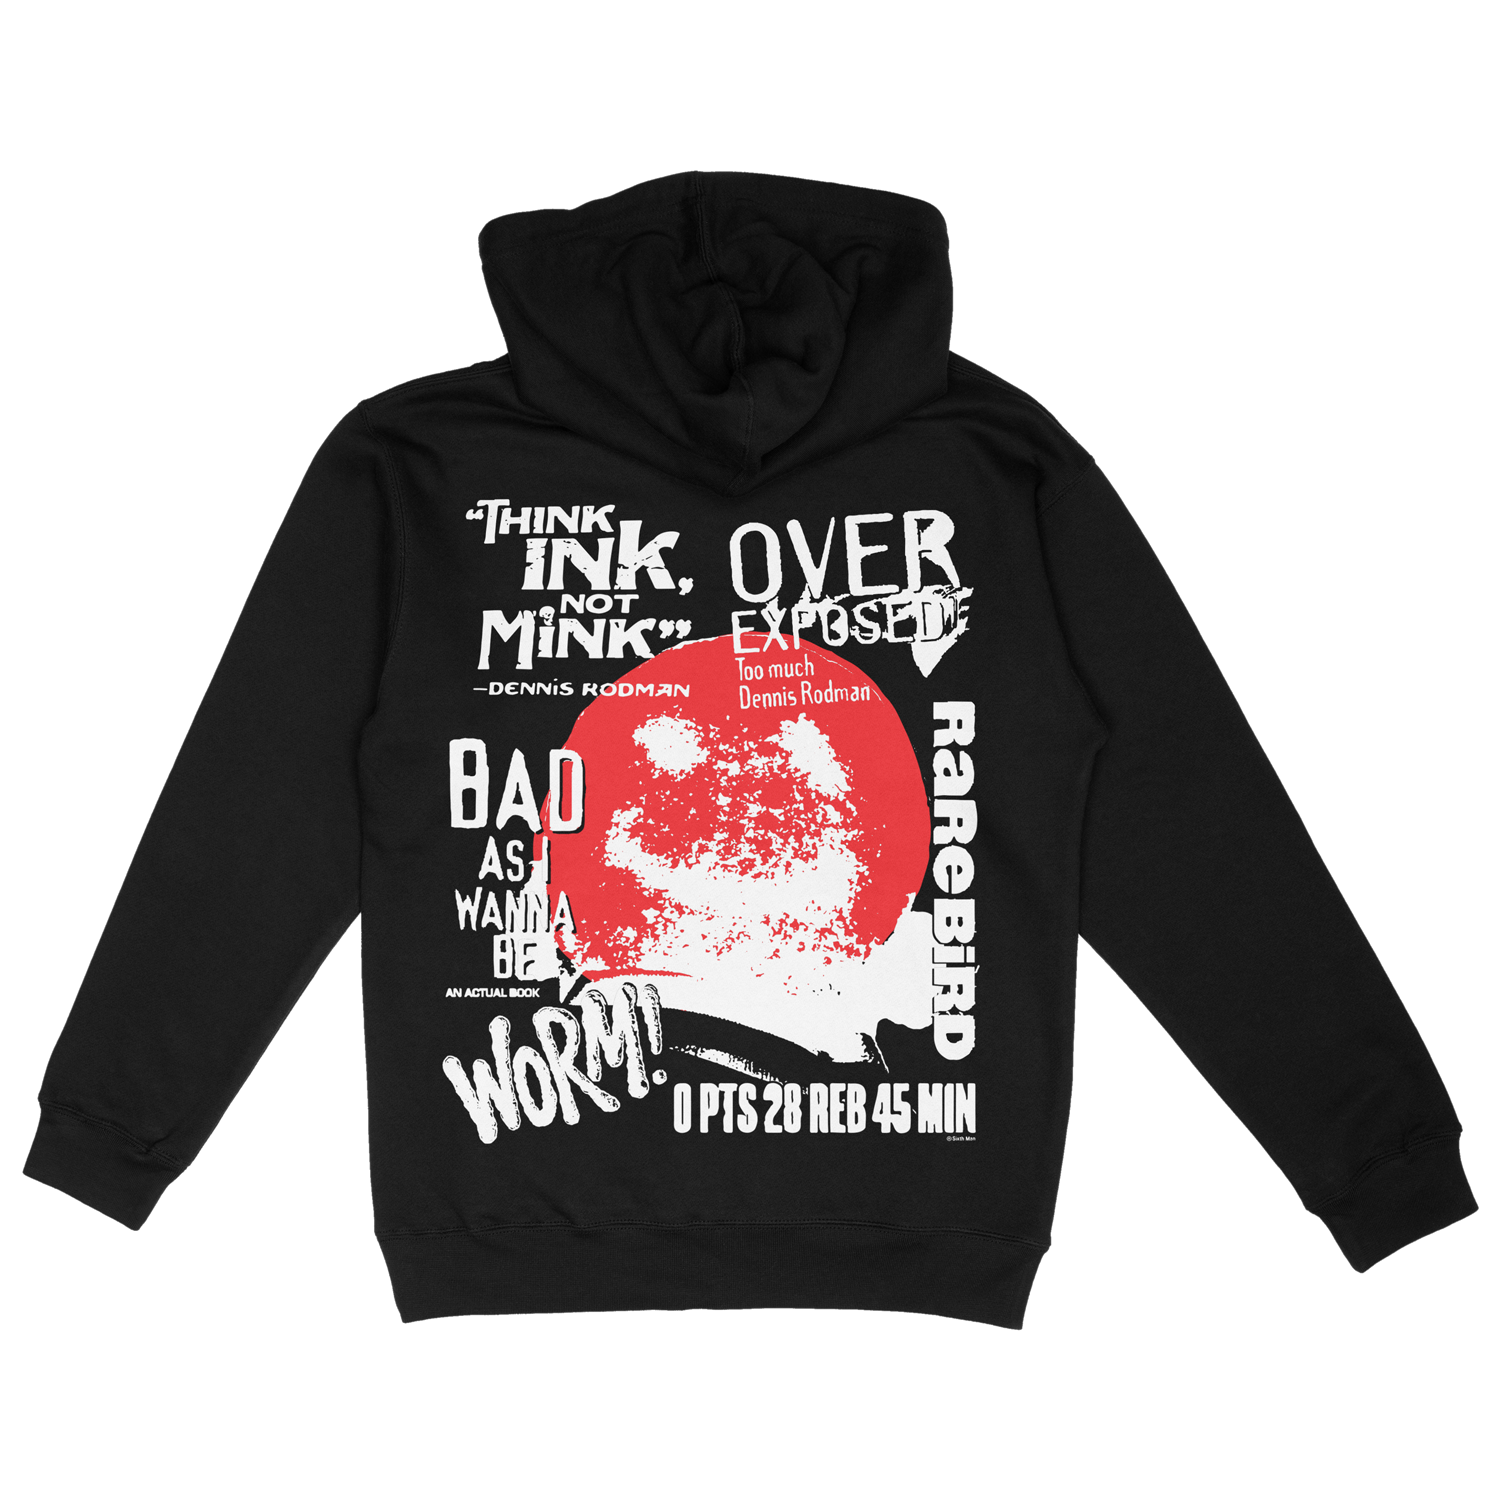 Back of the black hoodie featuring a screen-printed image of the back of Dennis Rodman's shaved head with a smiley face design. The design also includes Dennis Rodman quotes and headlines, adding a distinctive and expressive touch to this unique piece of sports and pop culture-inspired apparel.